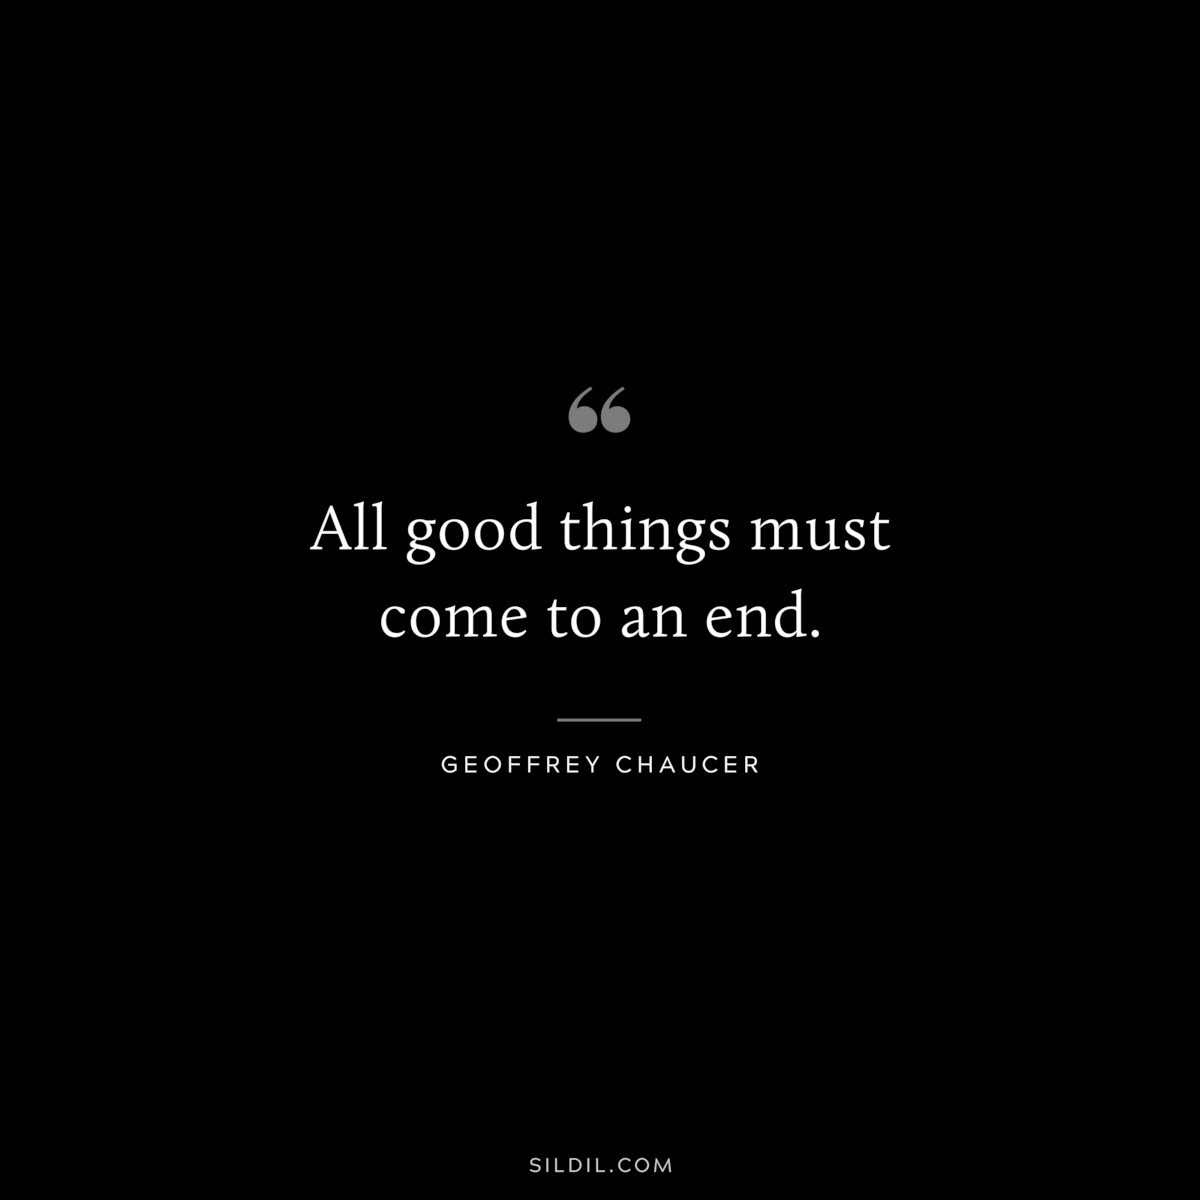 All good things must come to an end. ― Geoffrey Chaucer